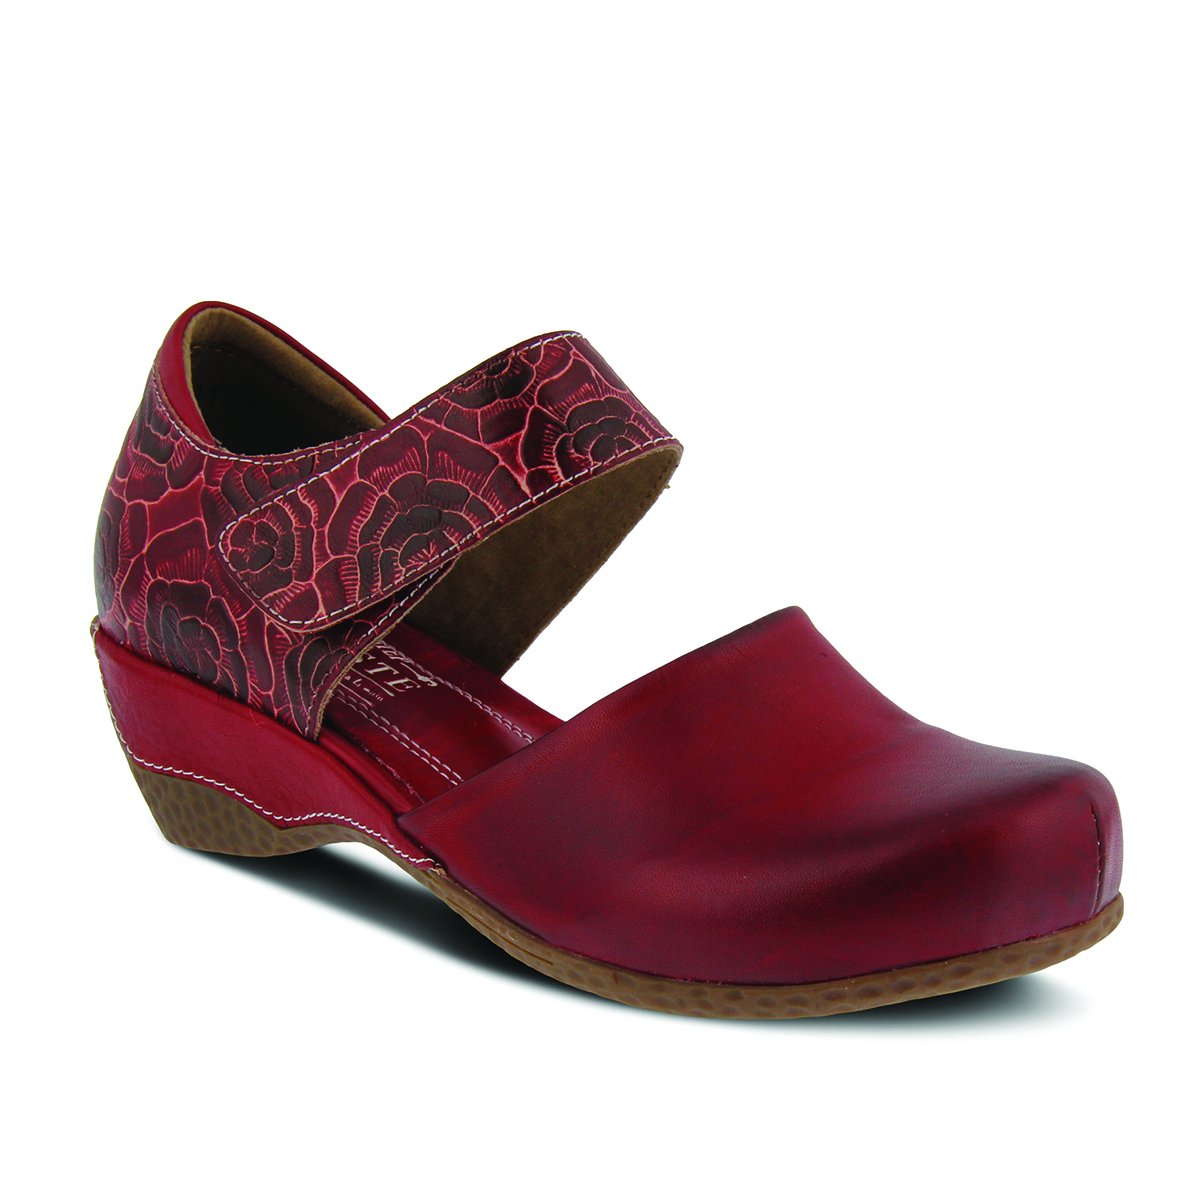 Hand painted leather two-piece Mary-Jane with hooks and loops wide strap fastening. Beautiful floral two-tone leather quarters with padded heel topline. Style name is Gloss-Pansy Mary Jane Shoe by L'Artiste Springstep Footwear